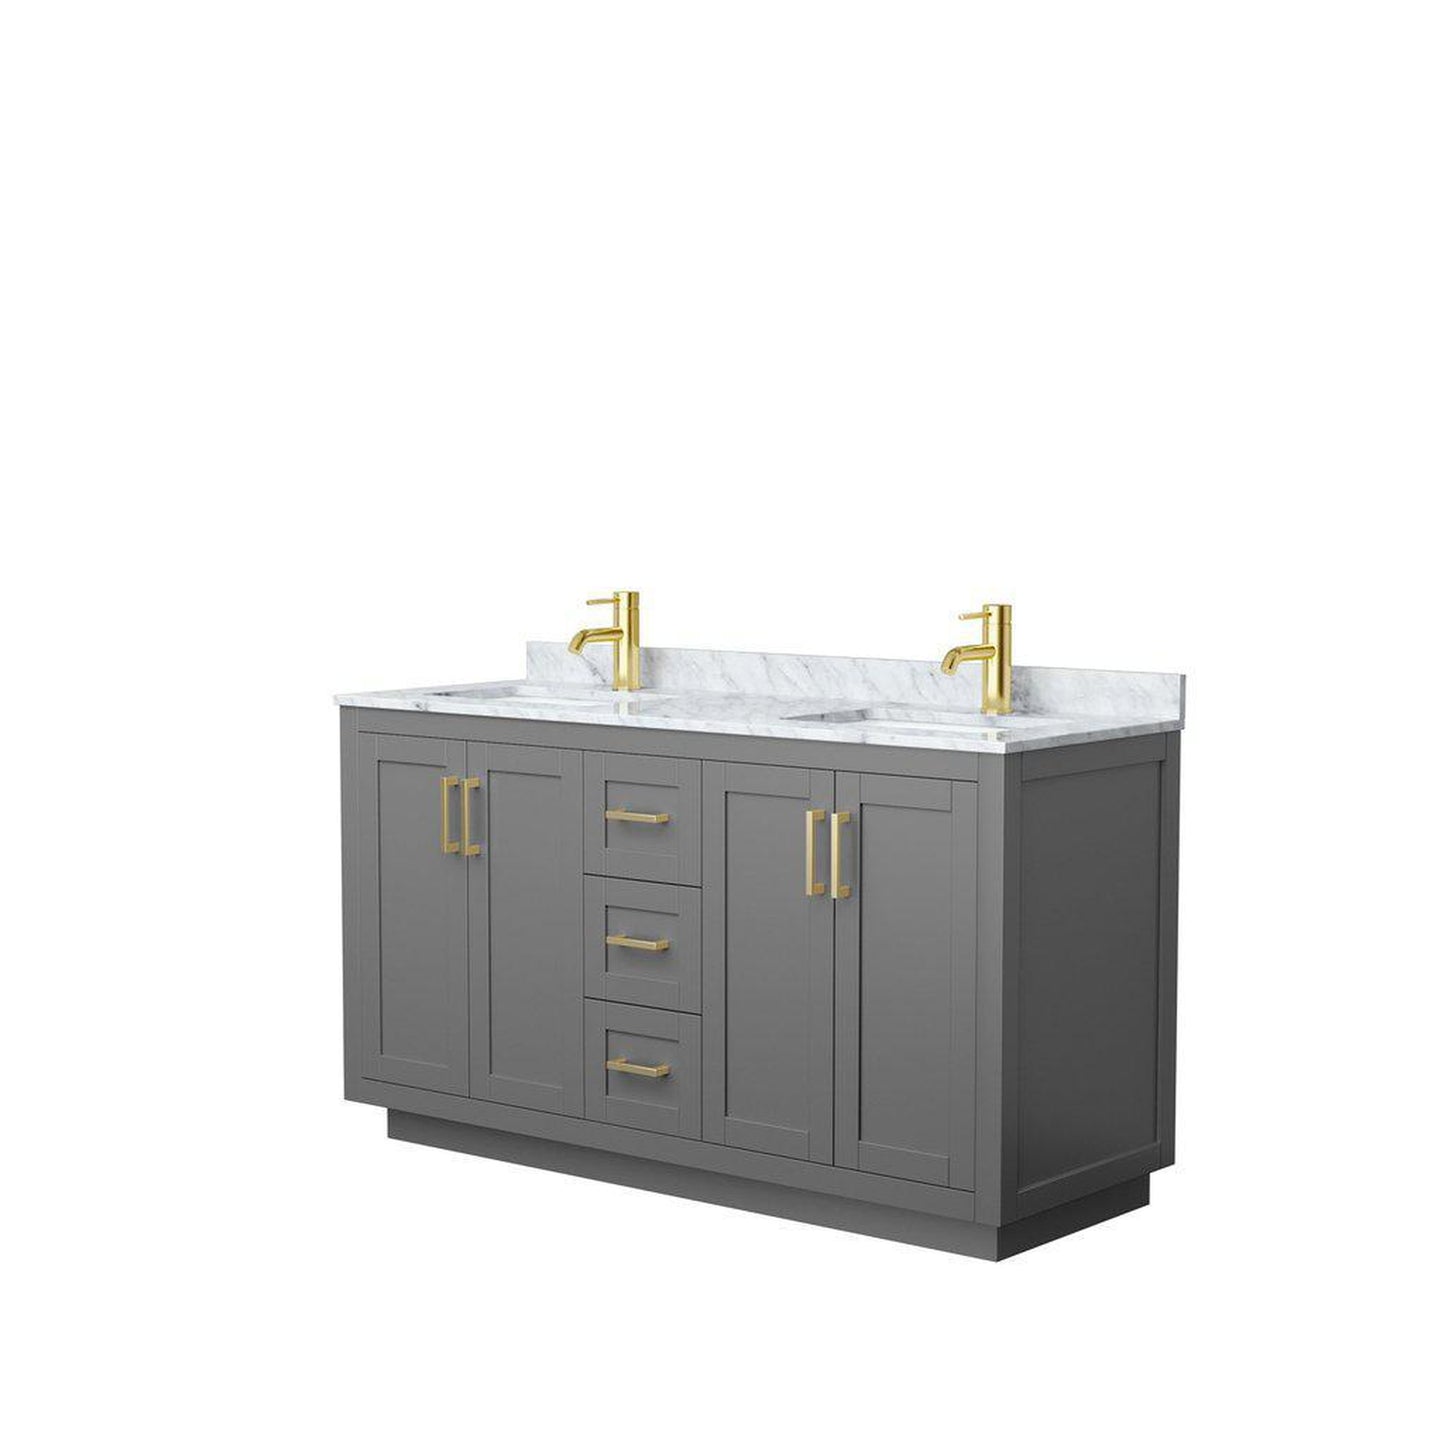 Wyndham Collection Miranda 60" Double Bathroom Dark Gray Vanity Set With White Carrara Marble Countertop, Undermount Square Sink, And Brushed Gold Trim